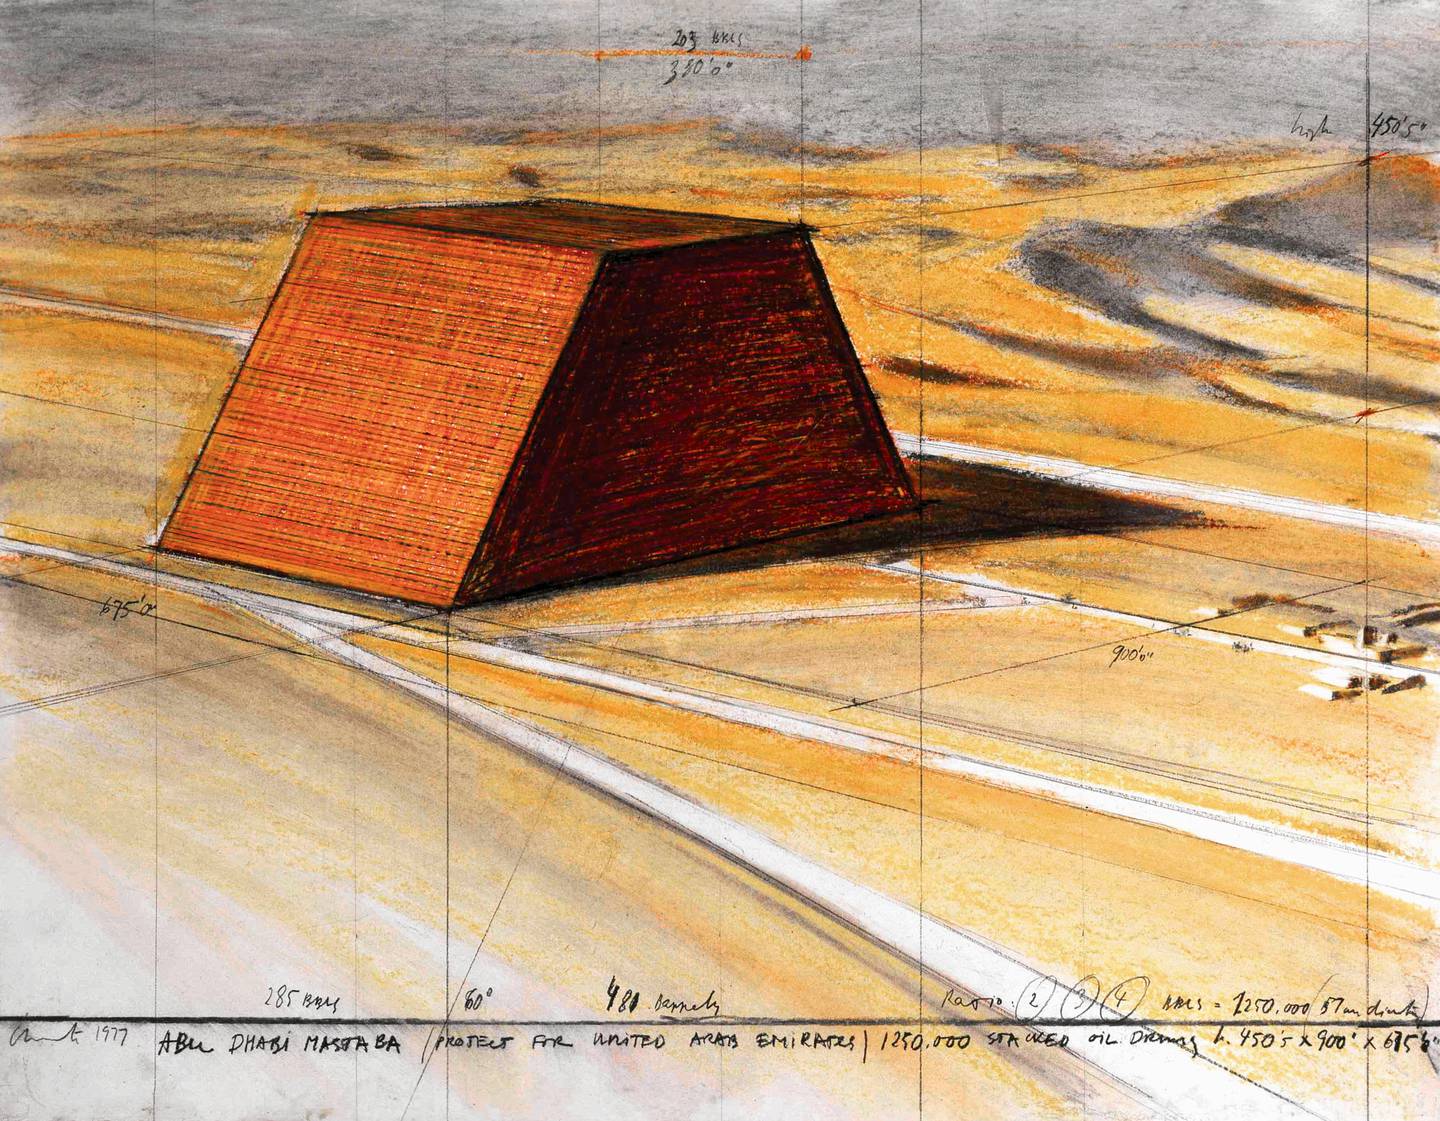 A drawing from 1977 of the Abu Dhabi mastaba project. Christo and Jeanne-Claude Foundation